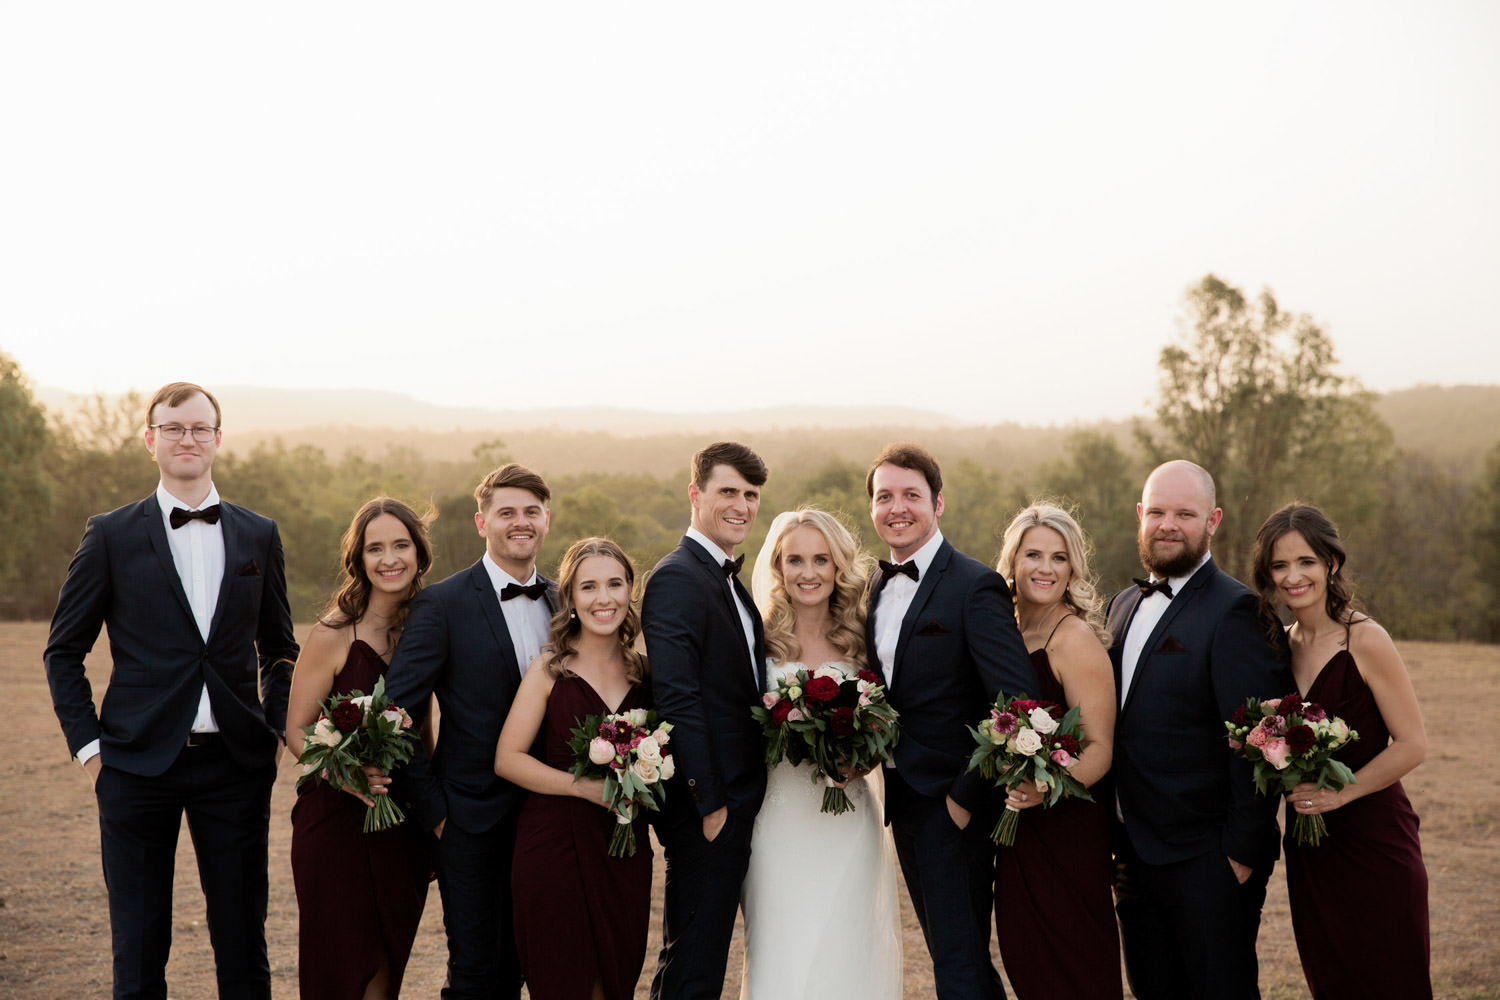 sunset-bridal-party-natural, fun, romantic-wedding-photography at Spicers-hiddenvale-QuinceandMulberryStudios